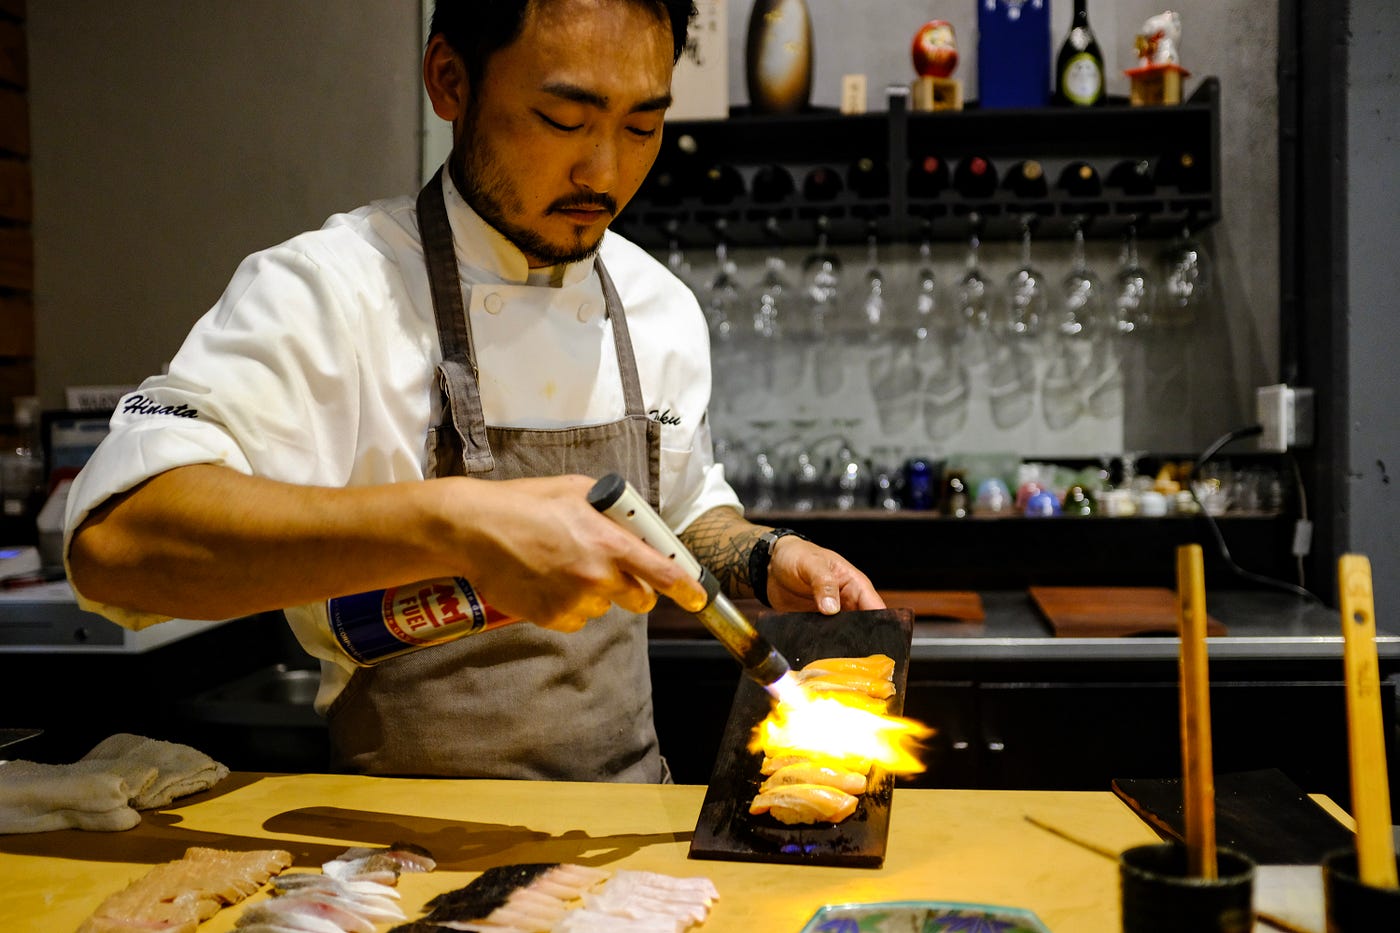 Meet the Sushi Chef Who Uses the Beach as His Kitchen, by Sam Hill